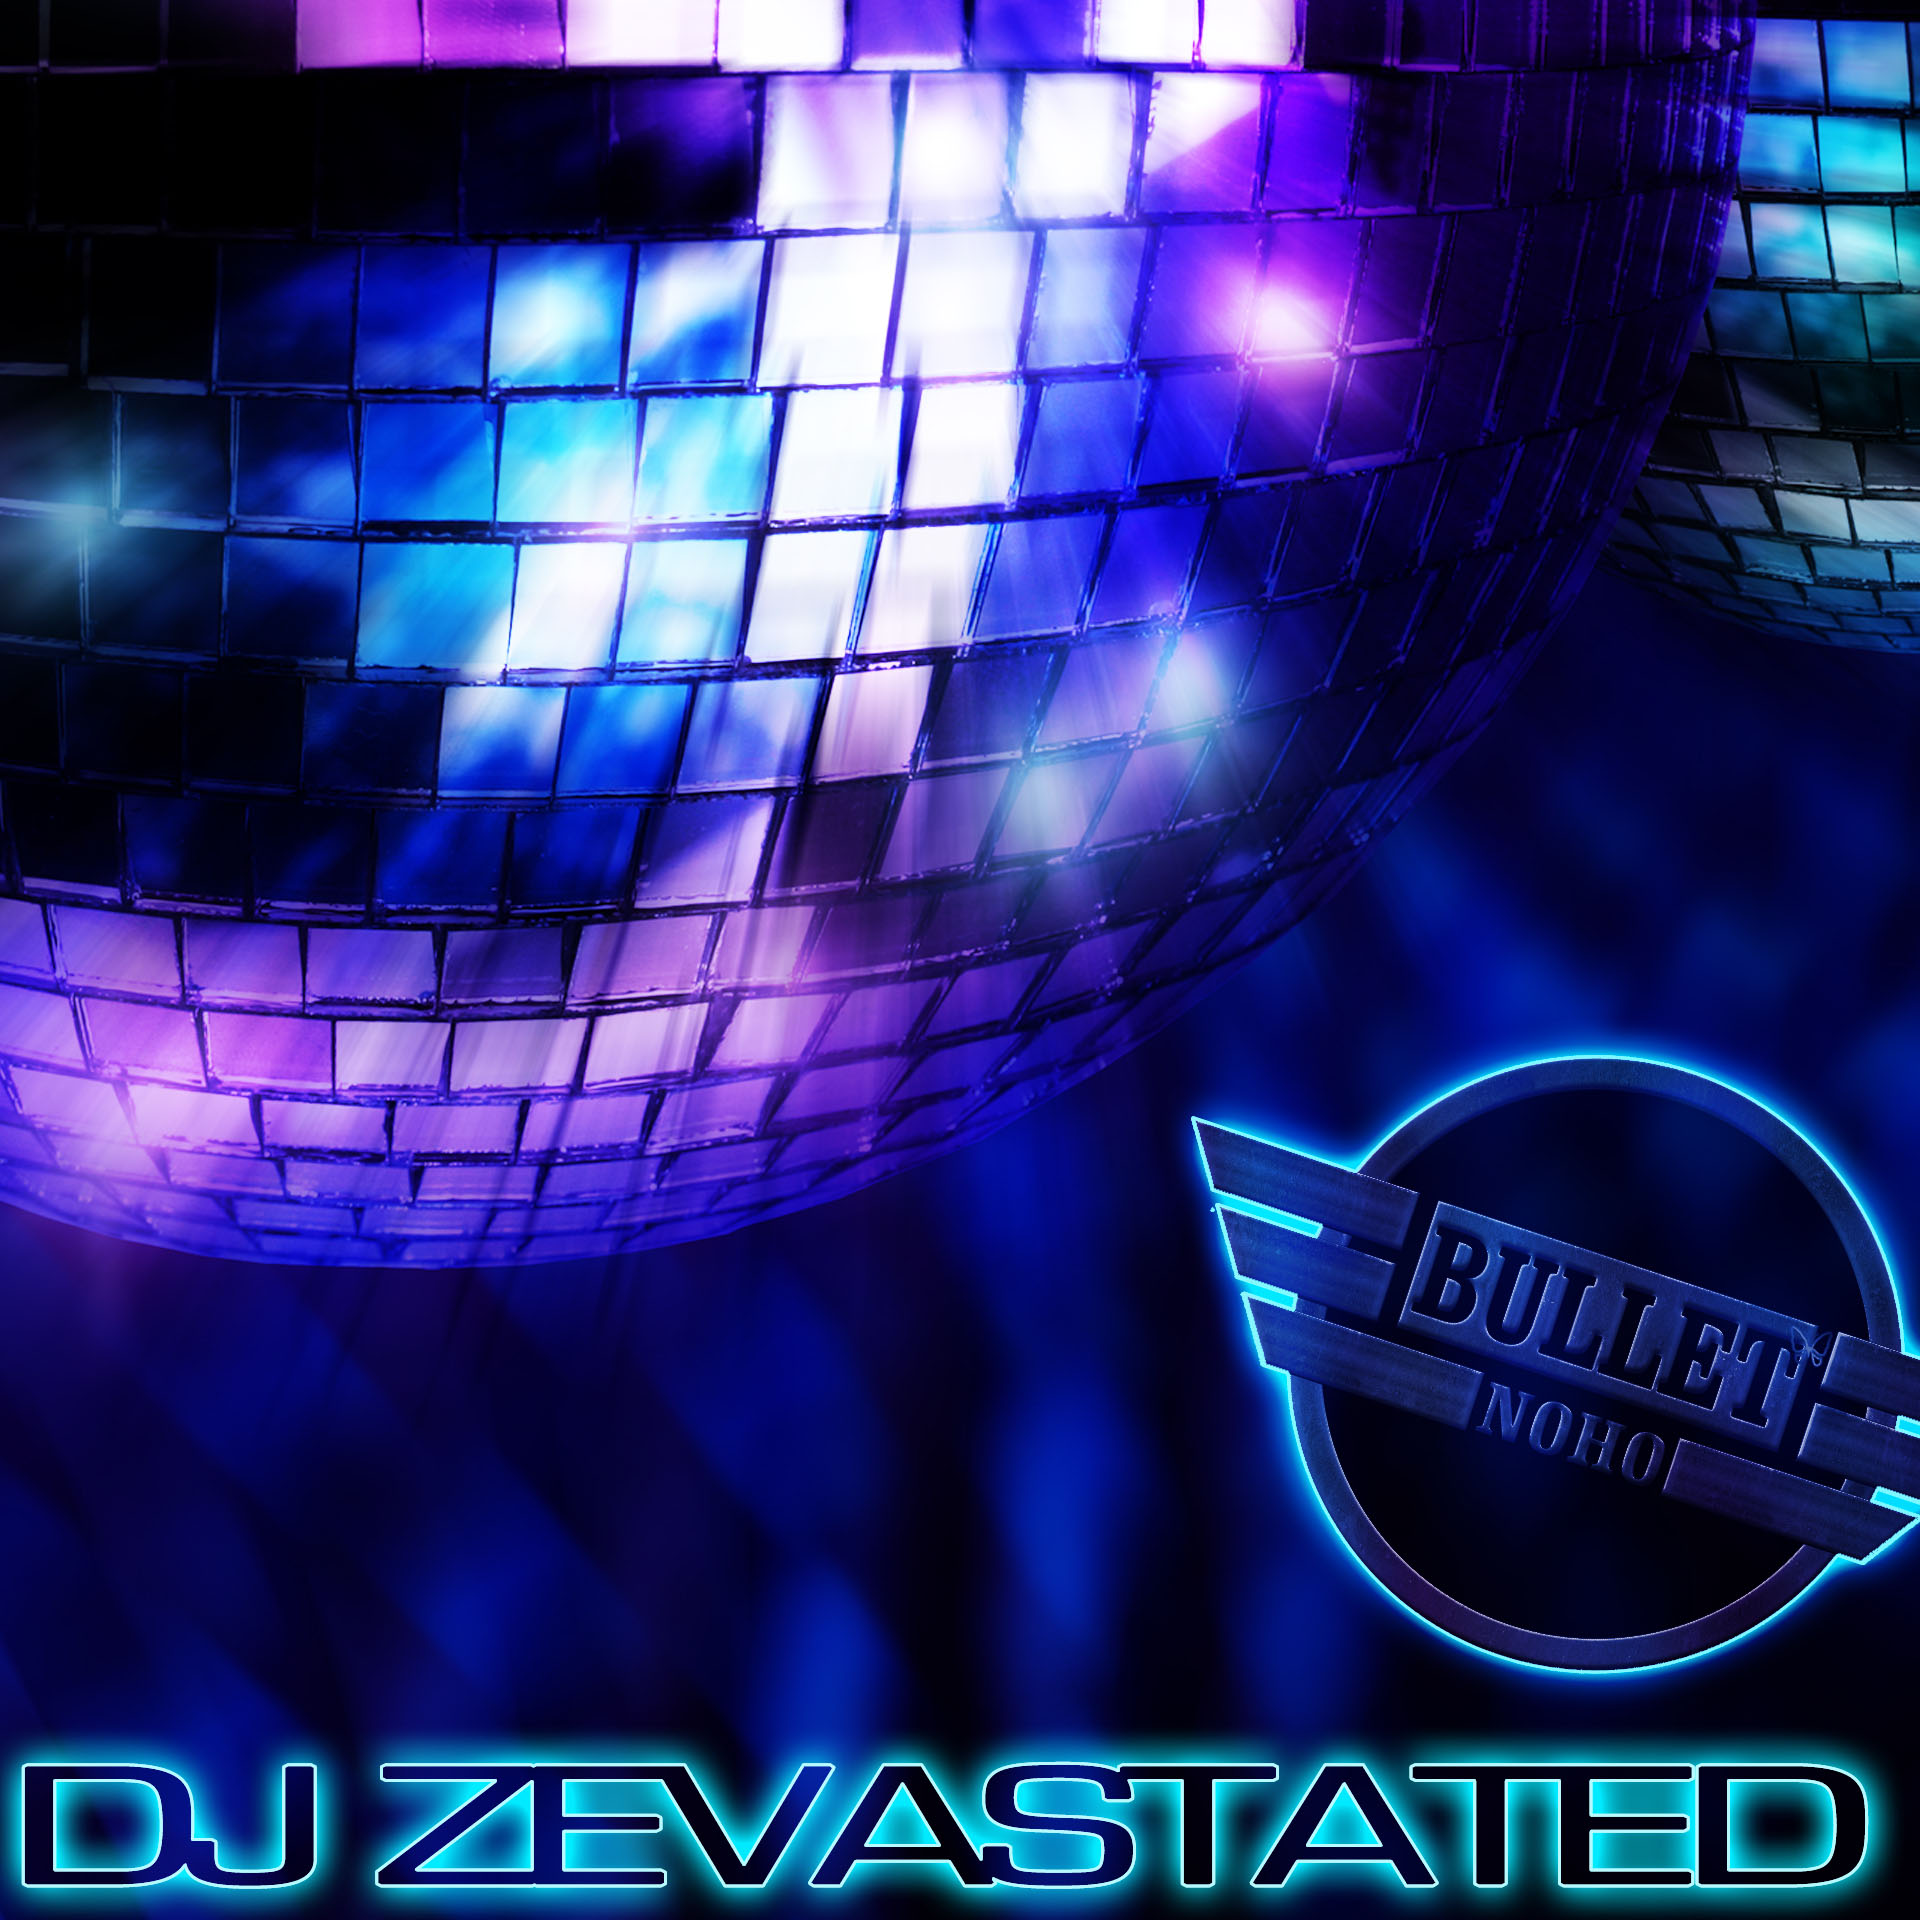 DJ ZEVASTATED: Sunday, 02/25/23 from 3:00 PM to 8:00 PM